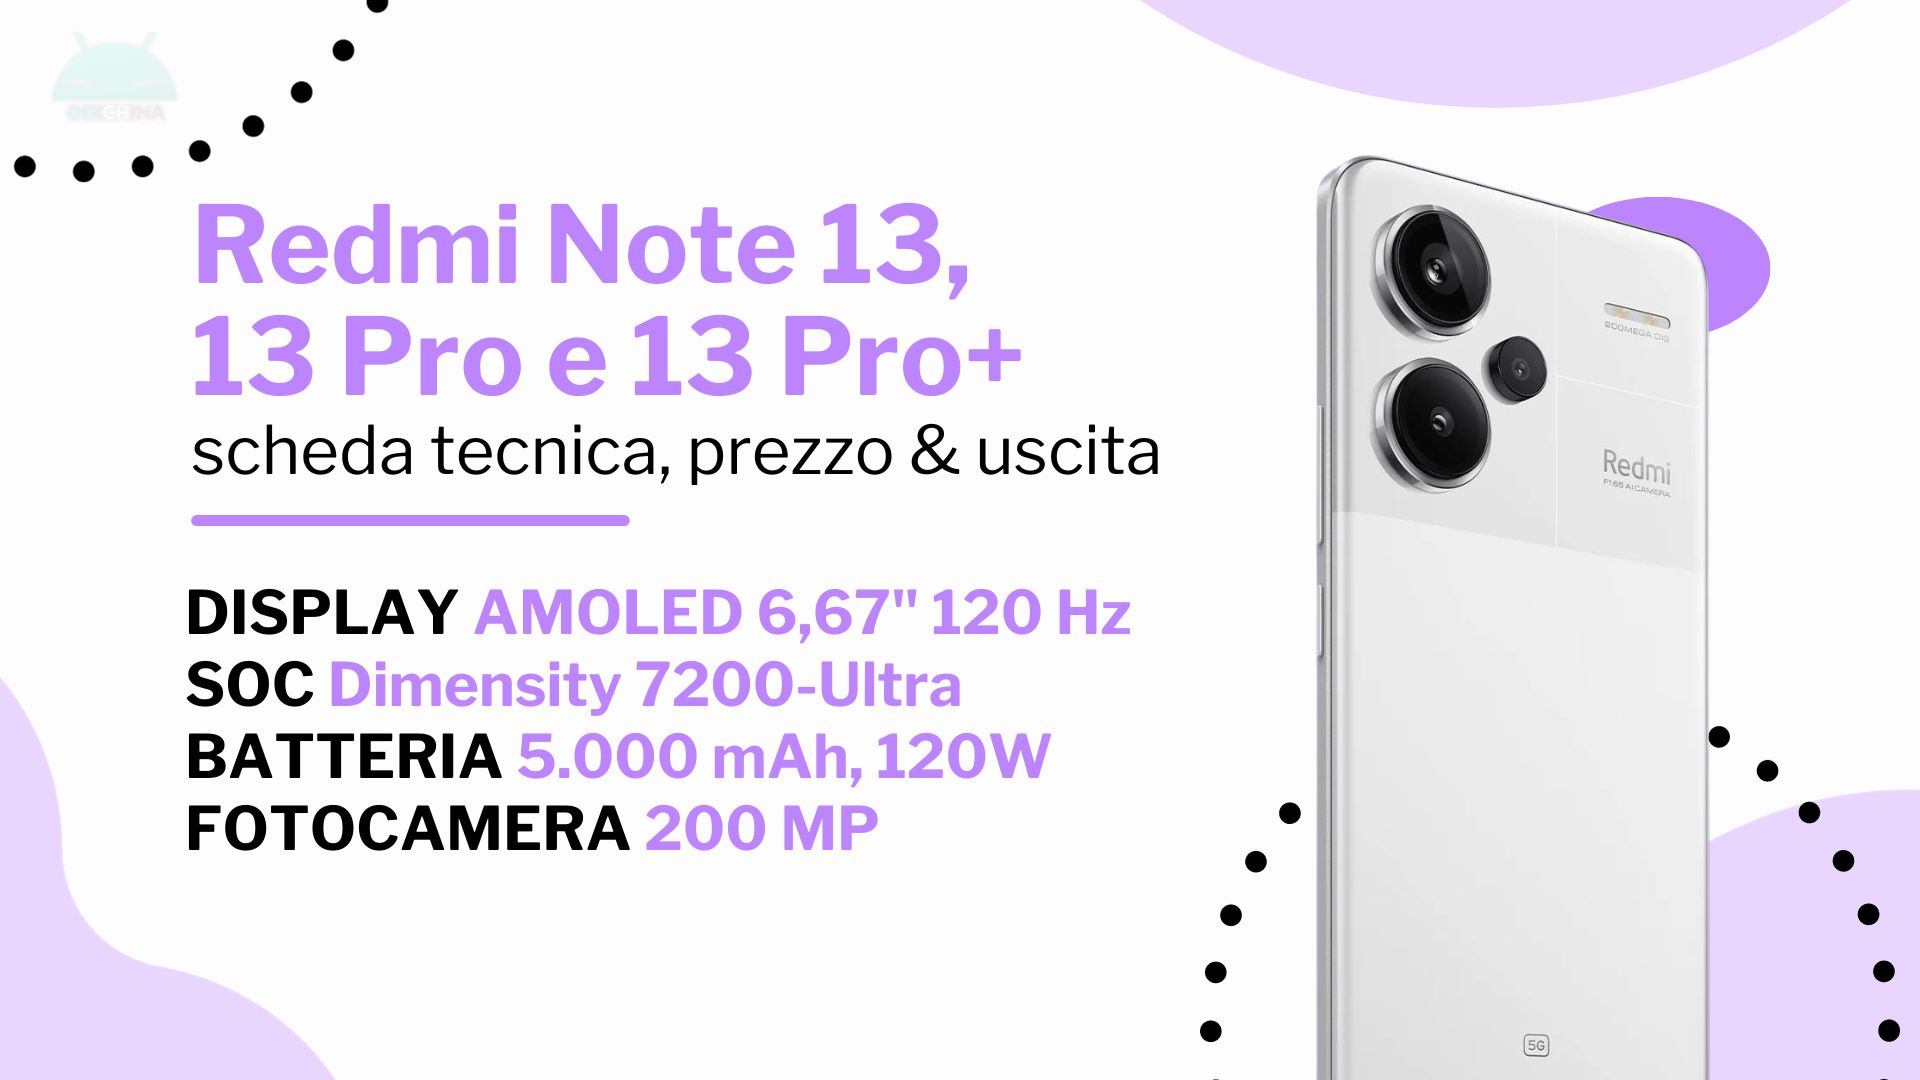 Note 13 Pro Plus Starts at Just €449 in Europe